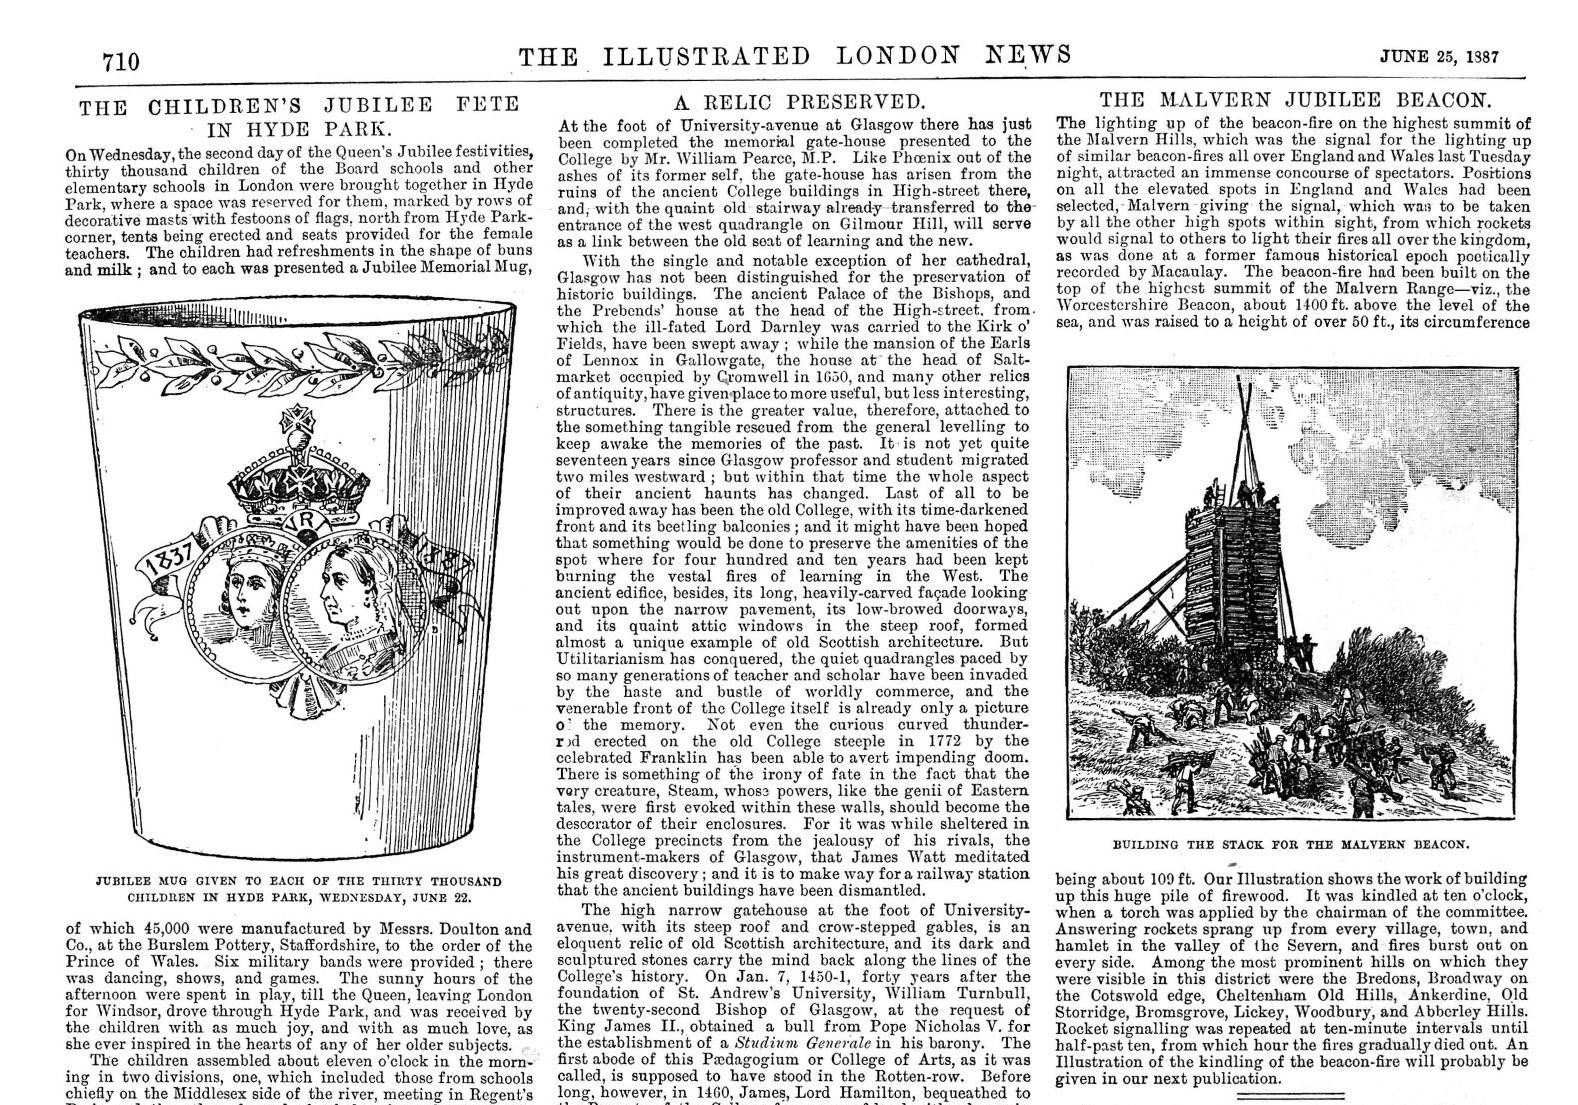 The Illustrated London News June 23, 1887 from TheGenealogist's Newspaper & Magazines